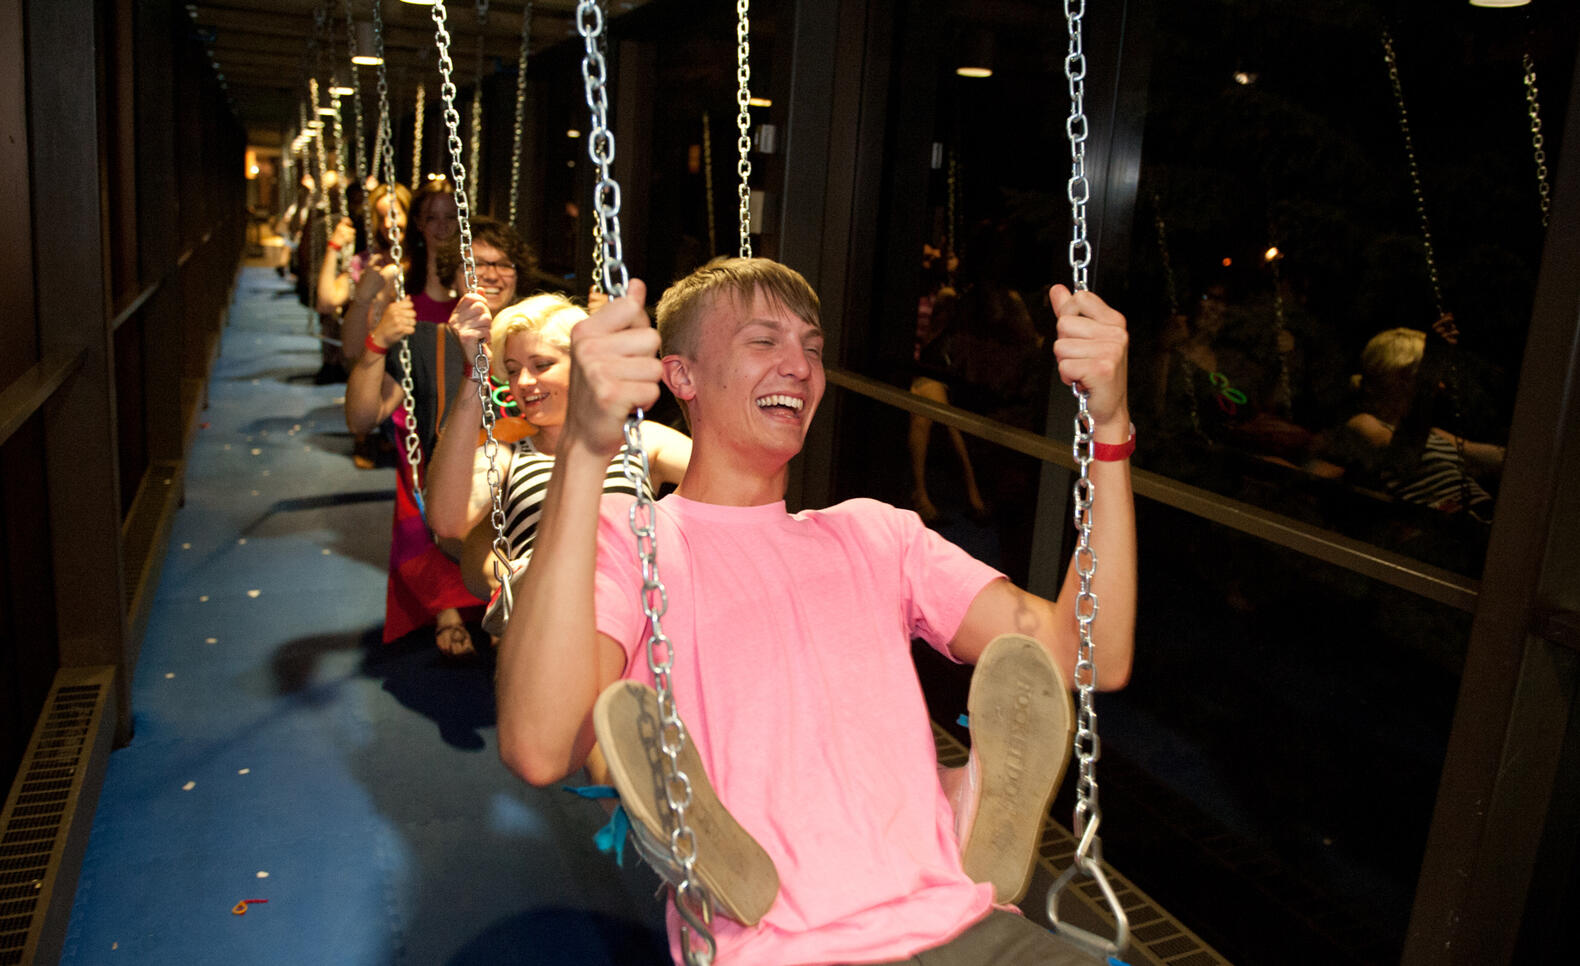 Students on swings in skyway during an event